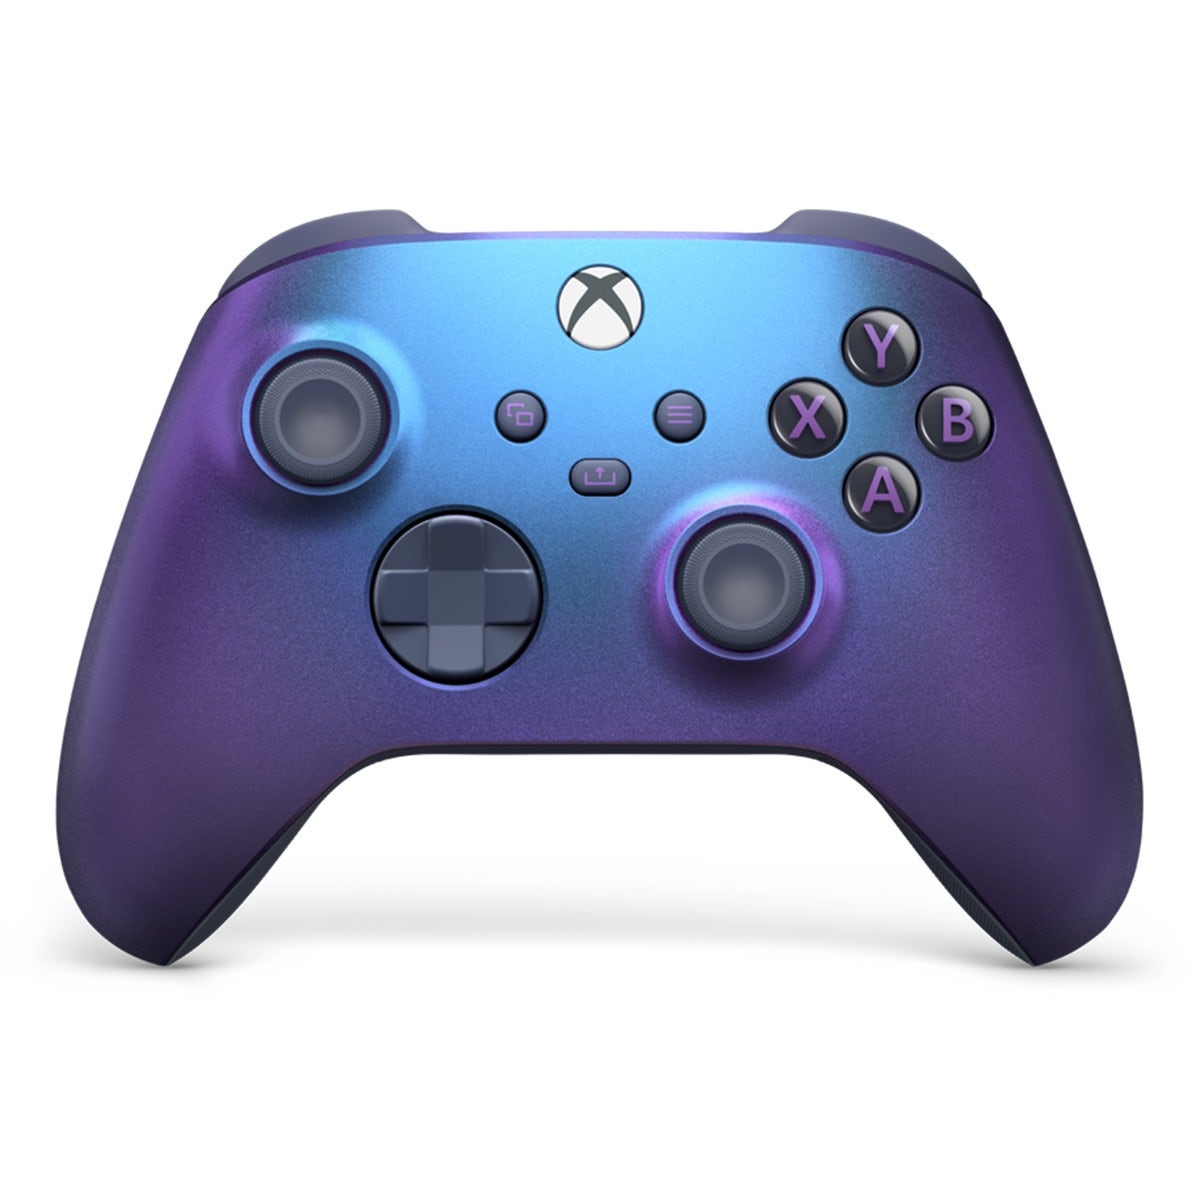 Xbox Wireless Controller Stellar Shift Special Edition in Blue & Purple - Modern design with improved ergonomics for better gameplay. AF-QAU-00087